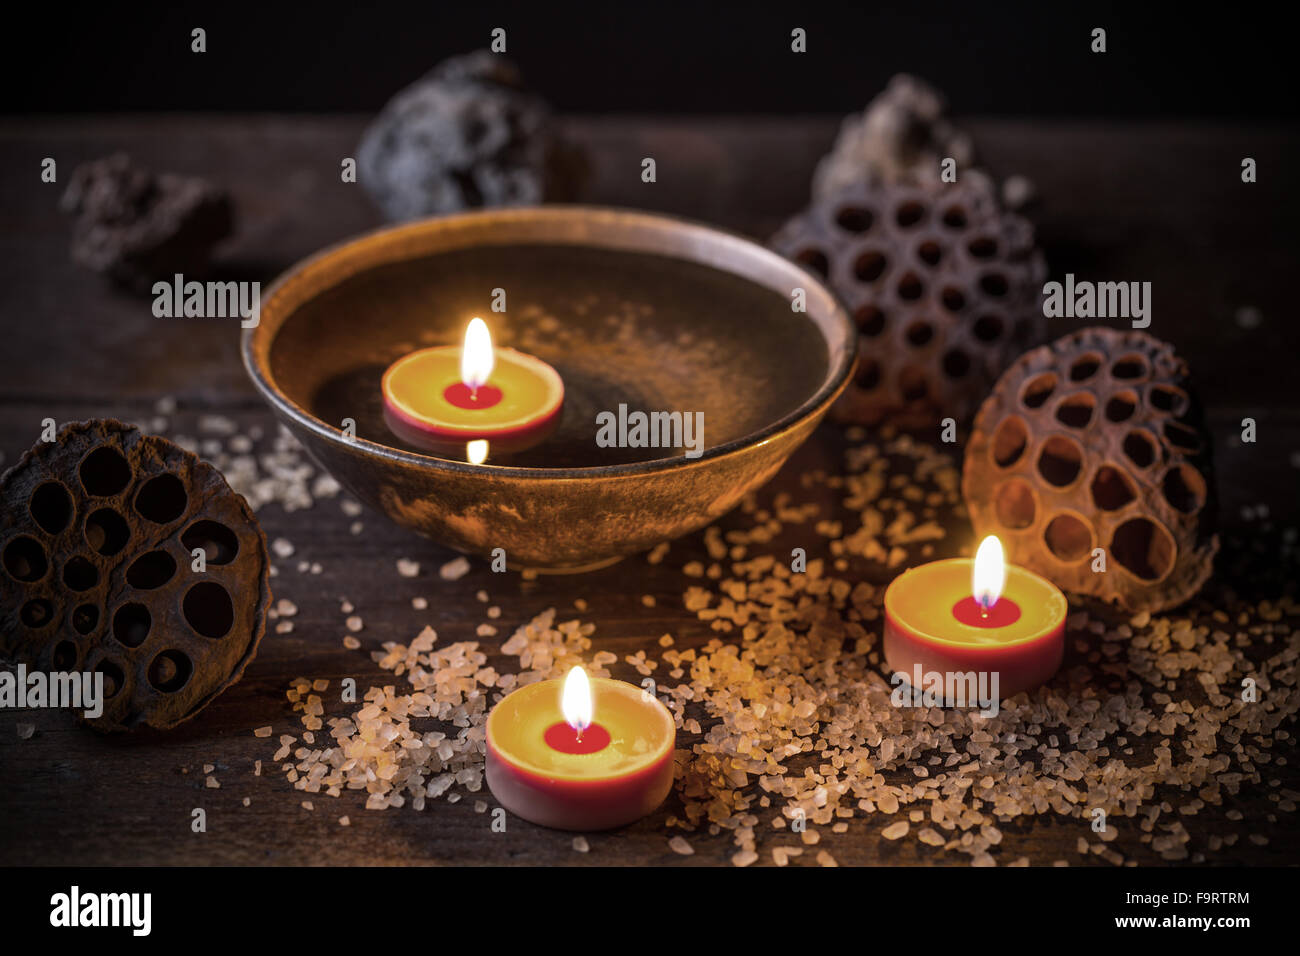 Spa concept with floating candle Stock Photo